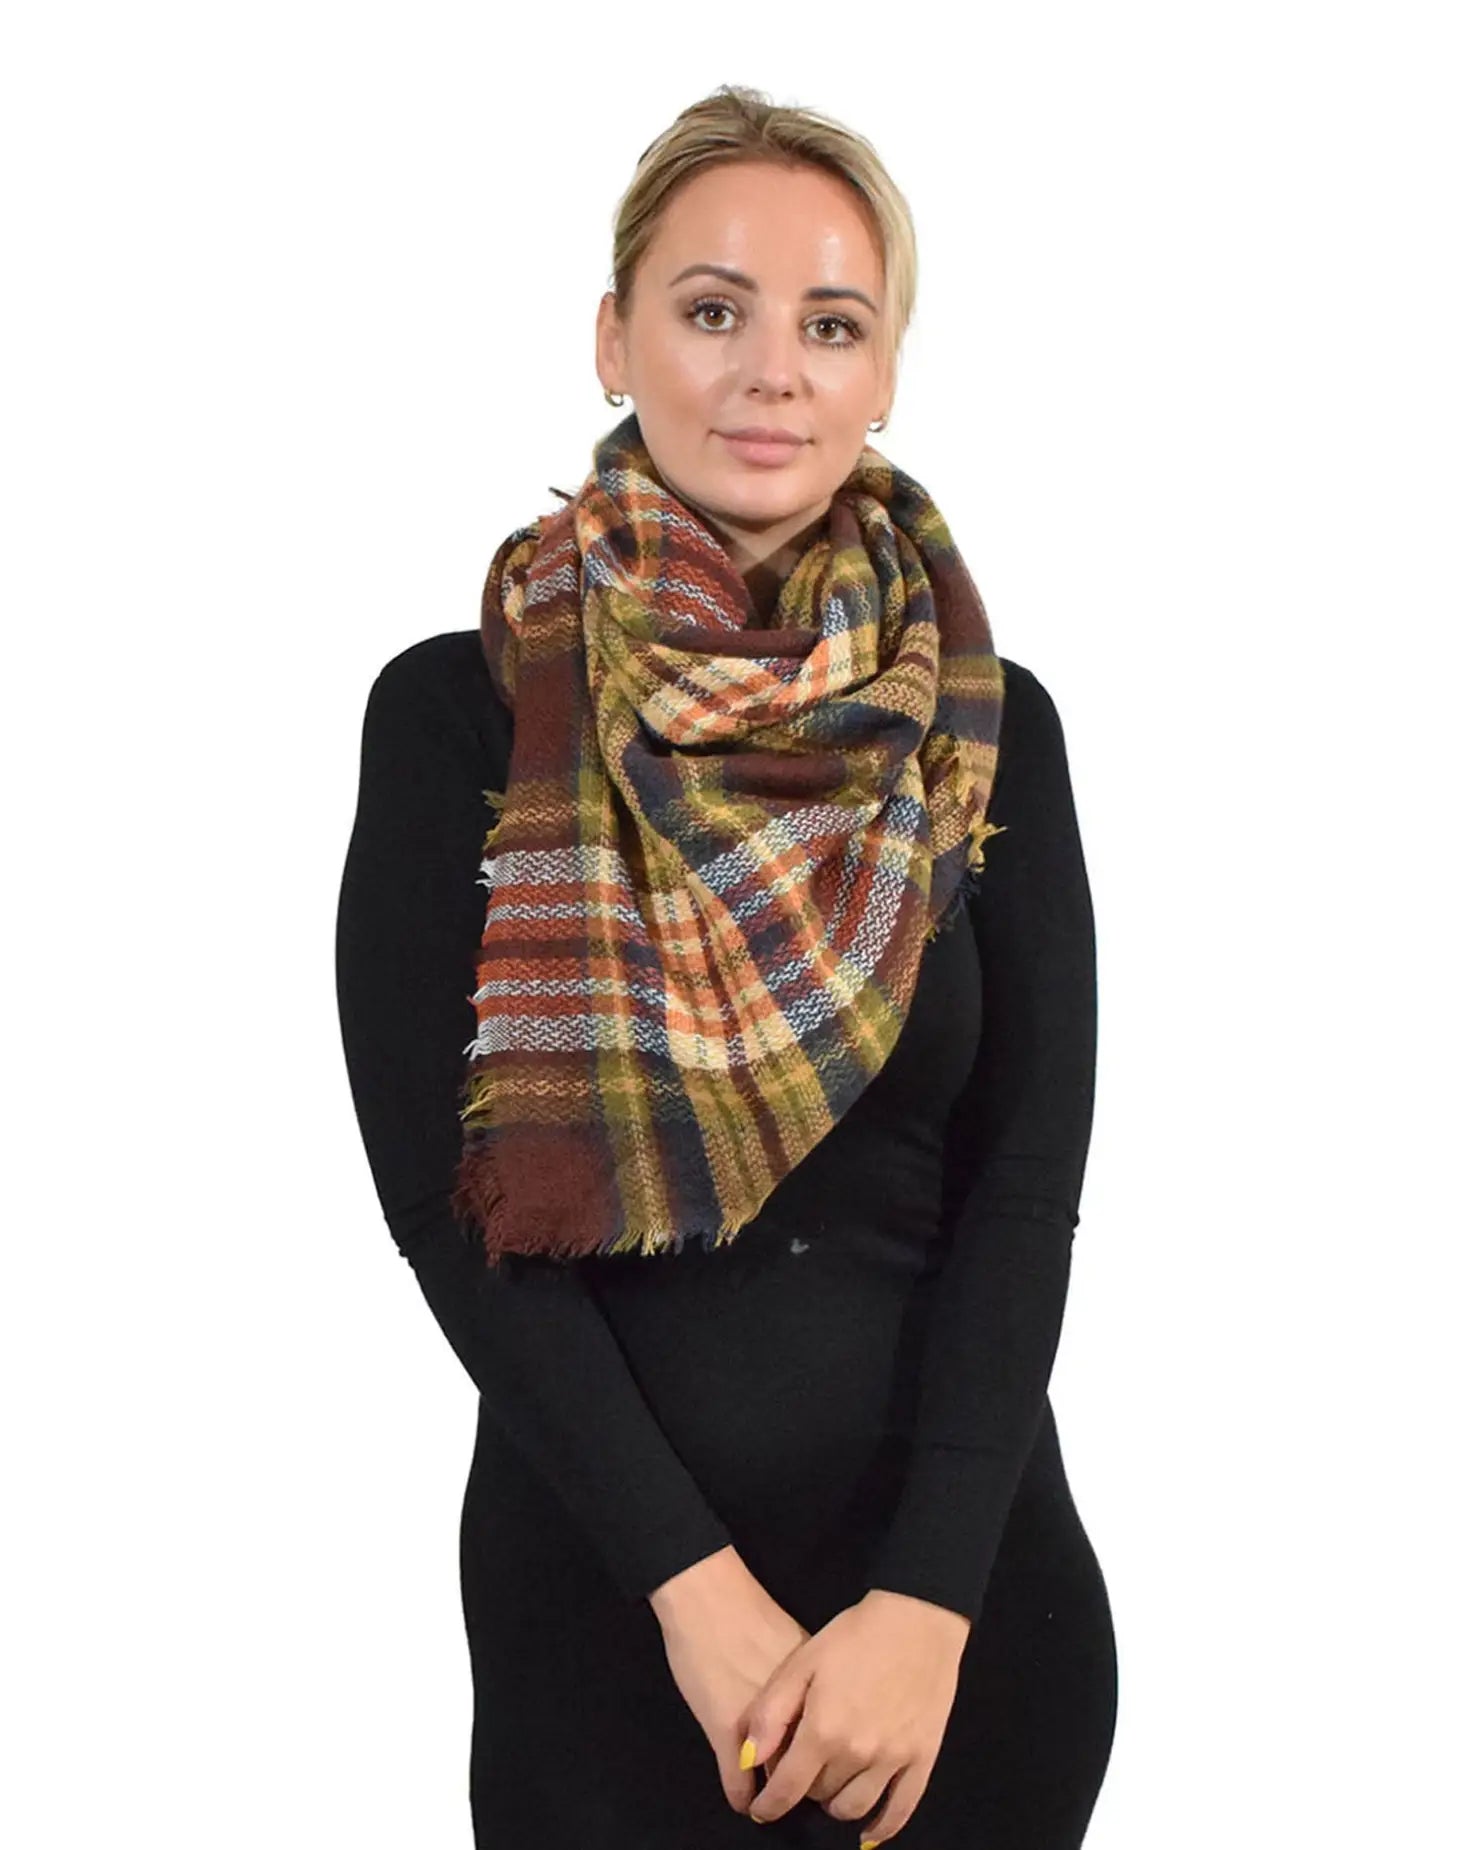 Woman wearing brown and yellow plaid scarf modeled on Oversized Tartan Check Winter Blanket Poncho